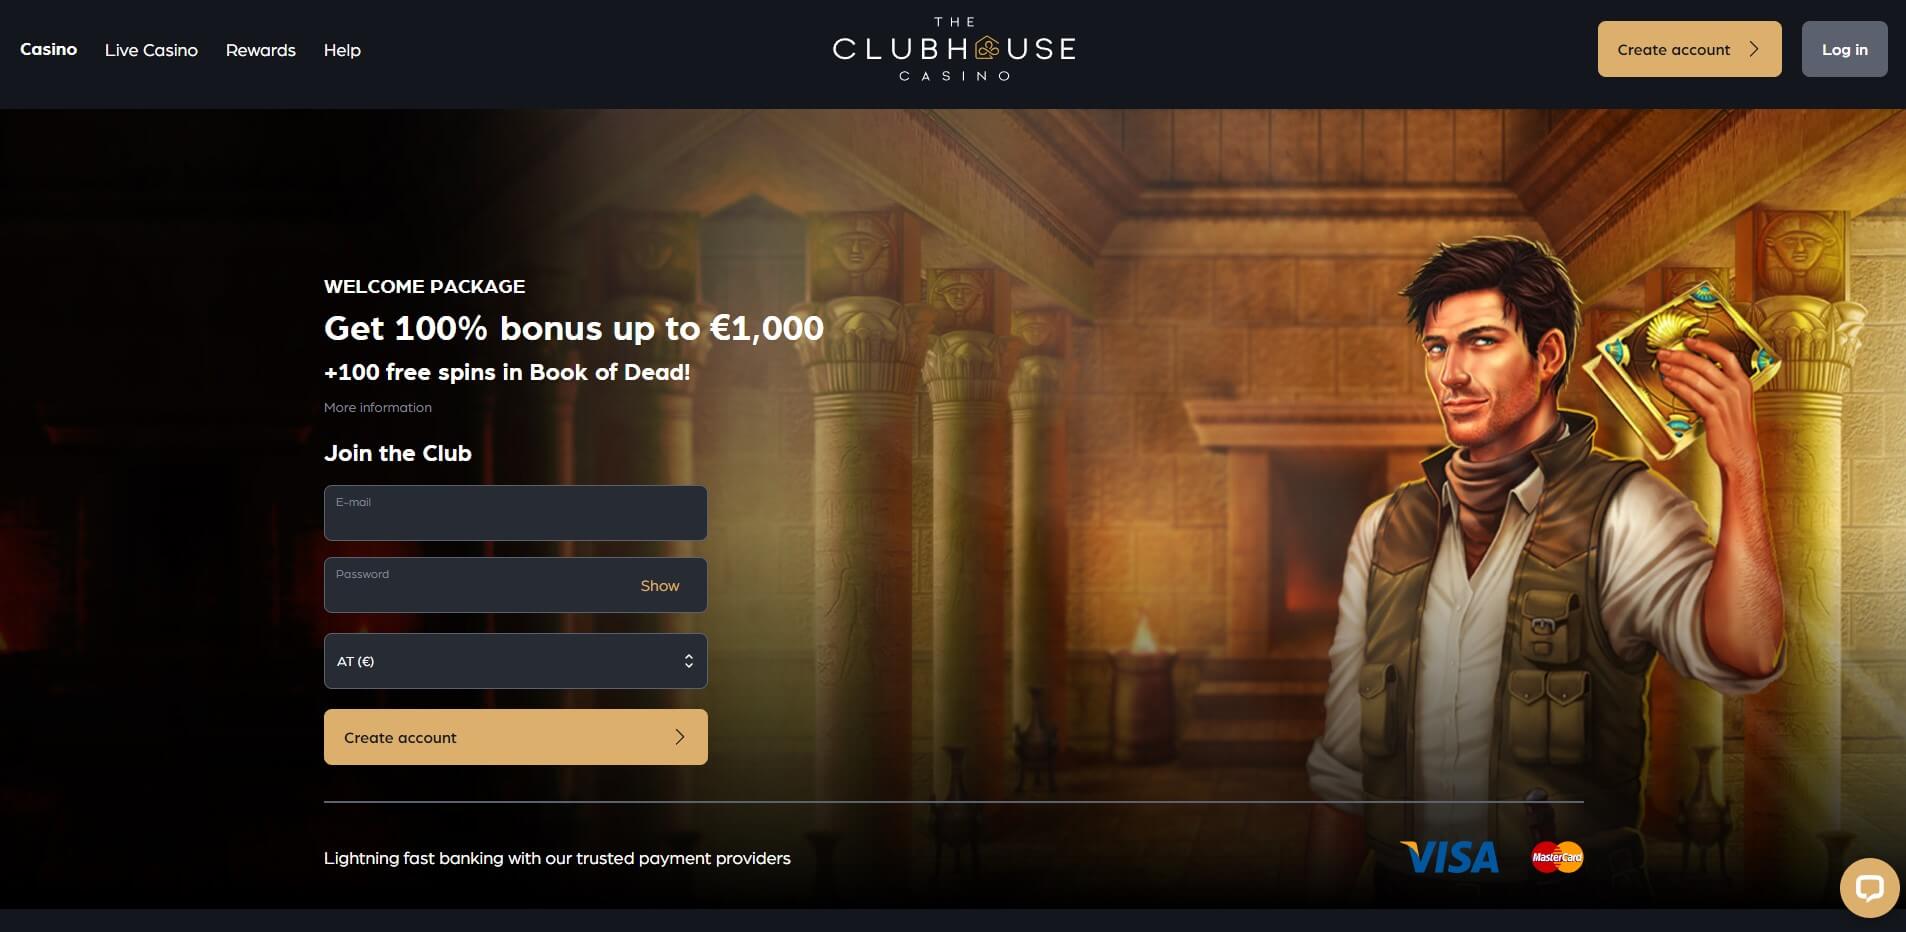 theclubhousecasino.com - Website Review